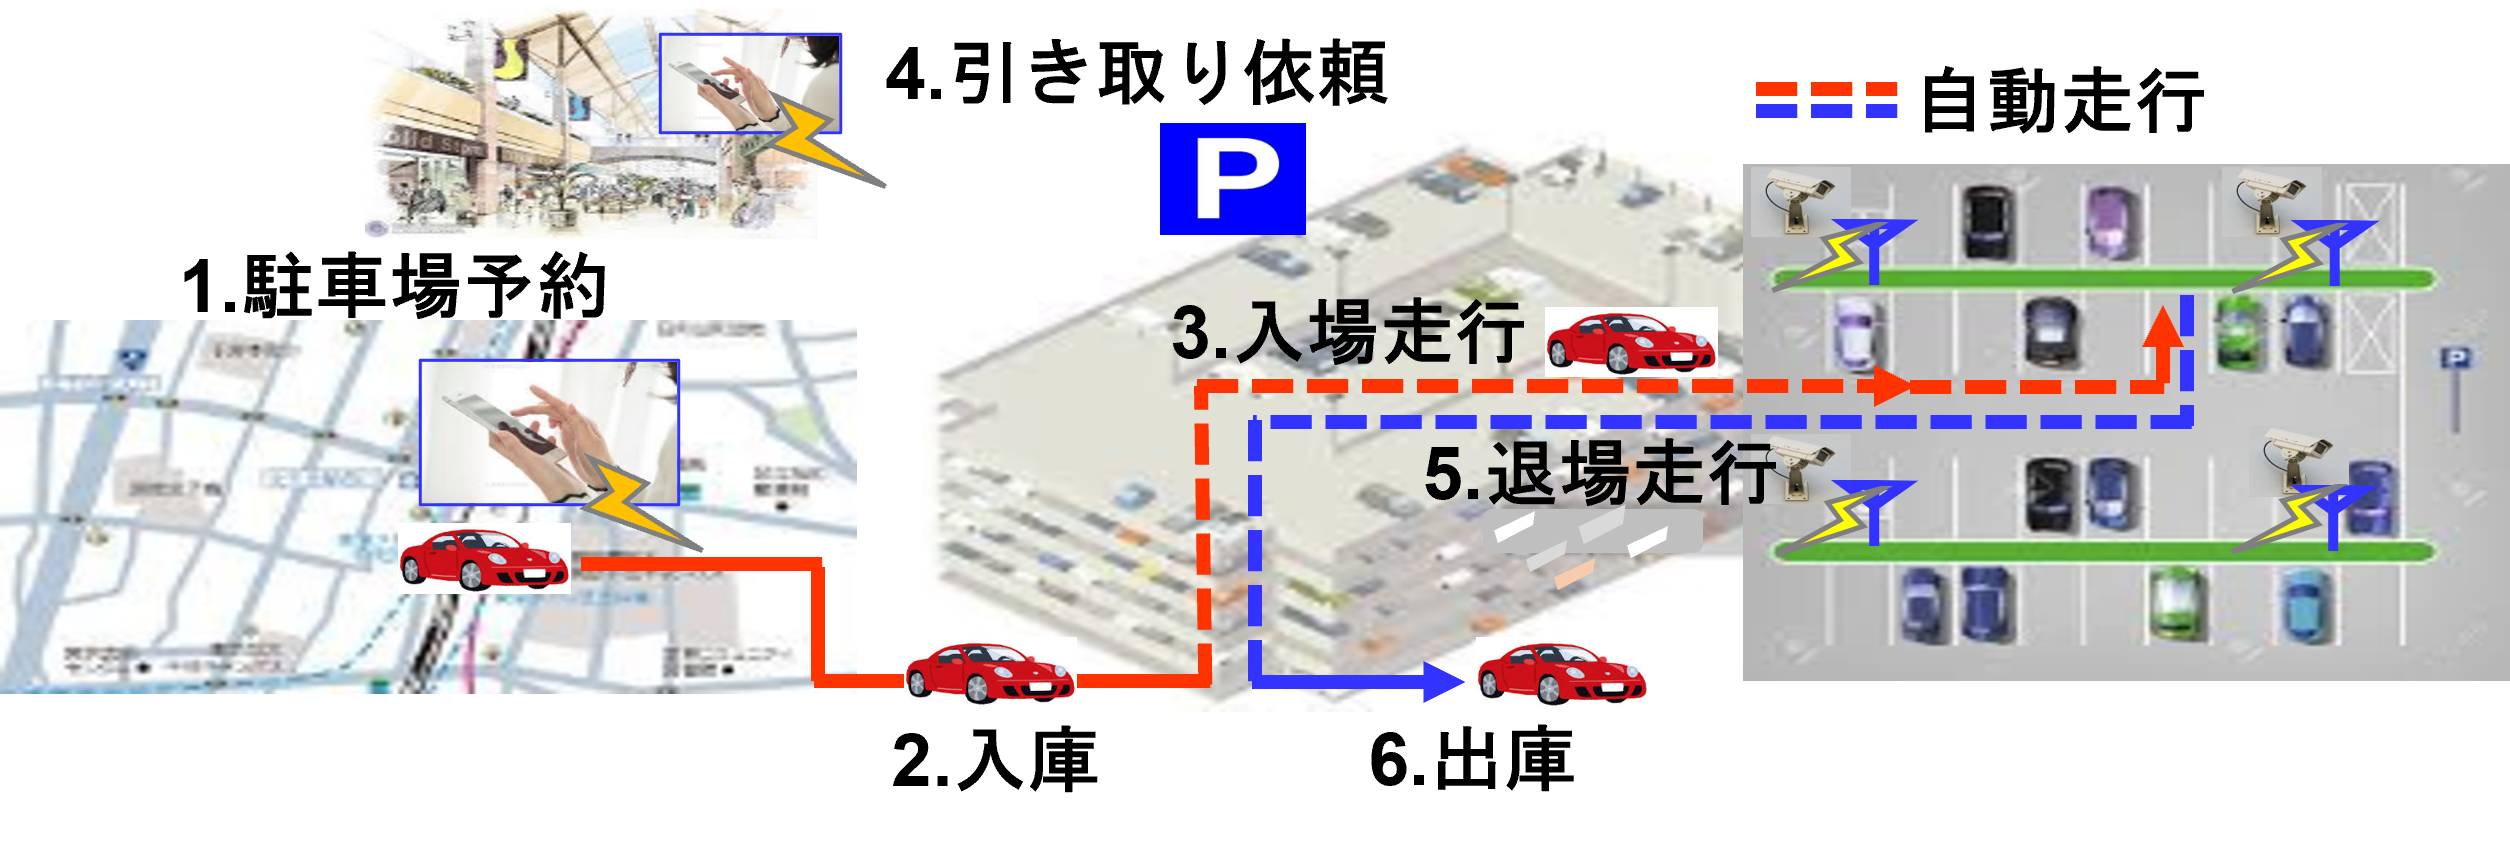 Japan and Germany Co-Develop Standard for Automated Valet Parking – Japan Industry News